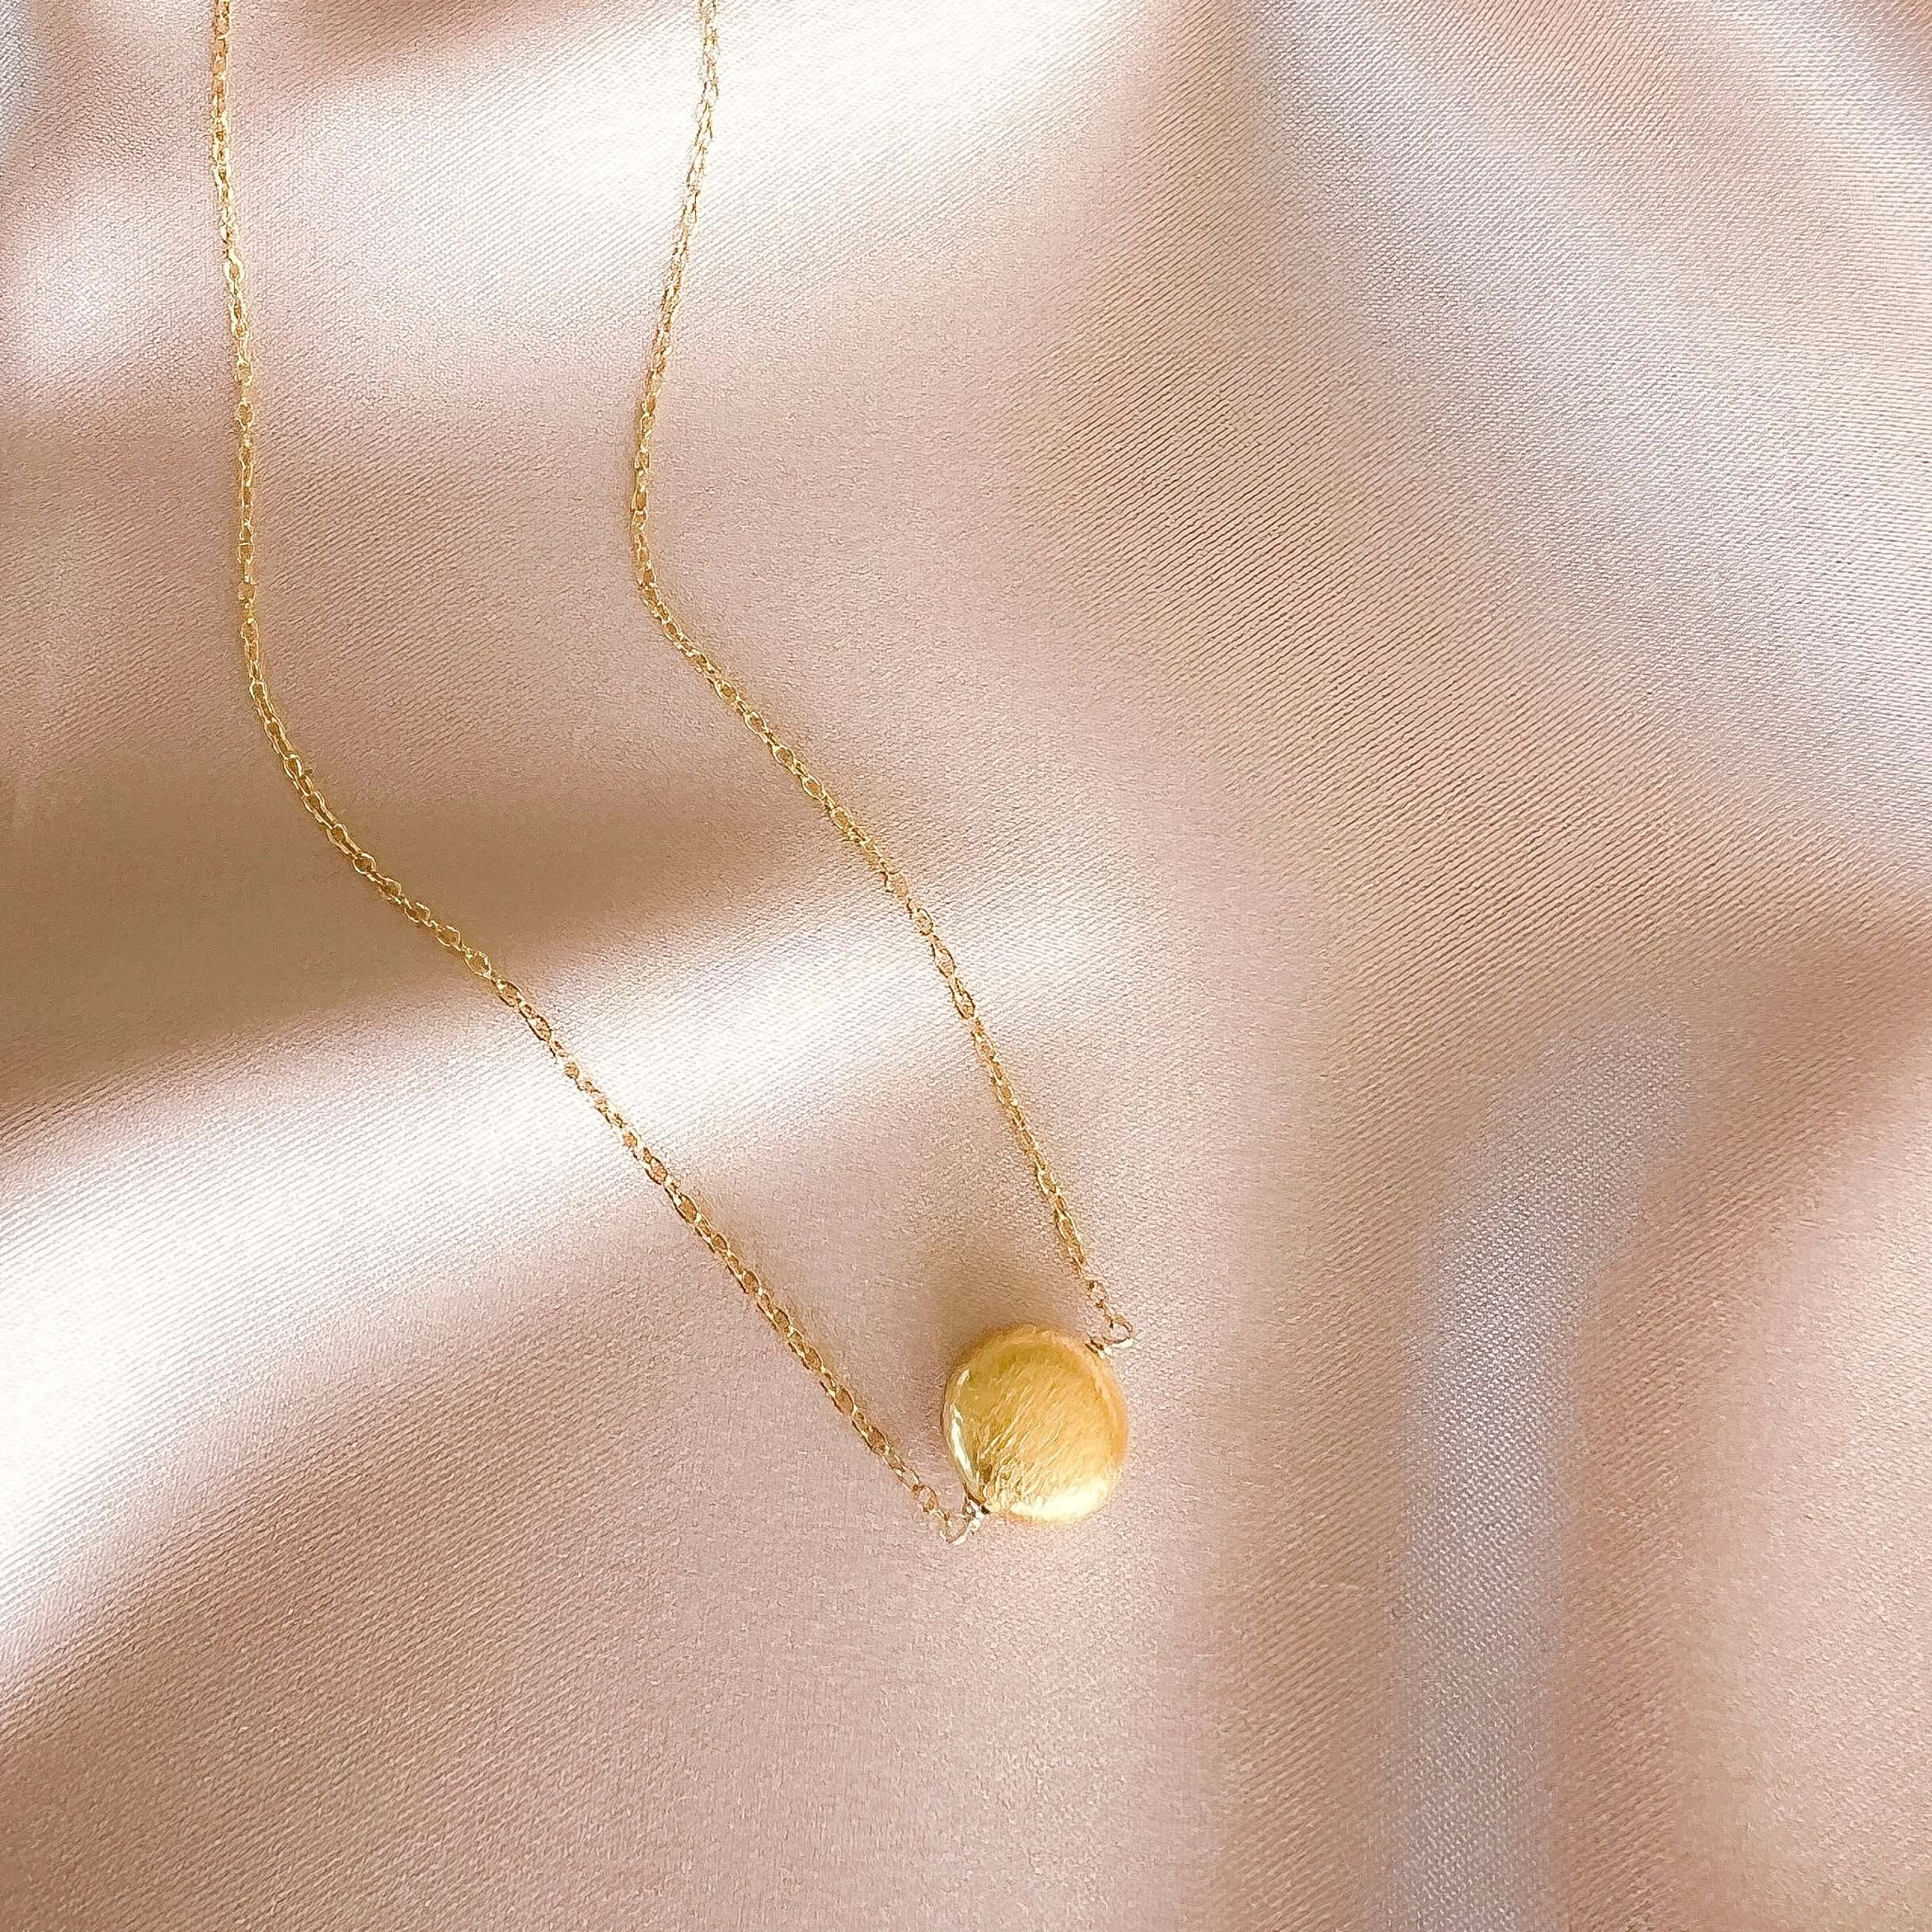 Minimalist 14k Gold Disc Pendant, Handcrafted for Adaptable Necklace Layering